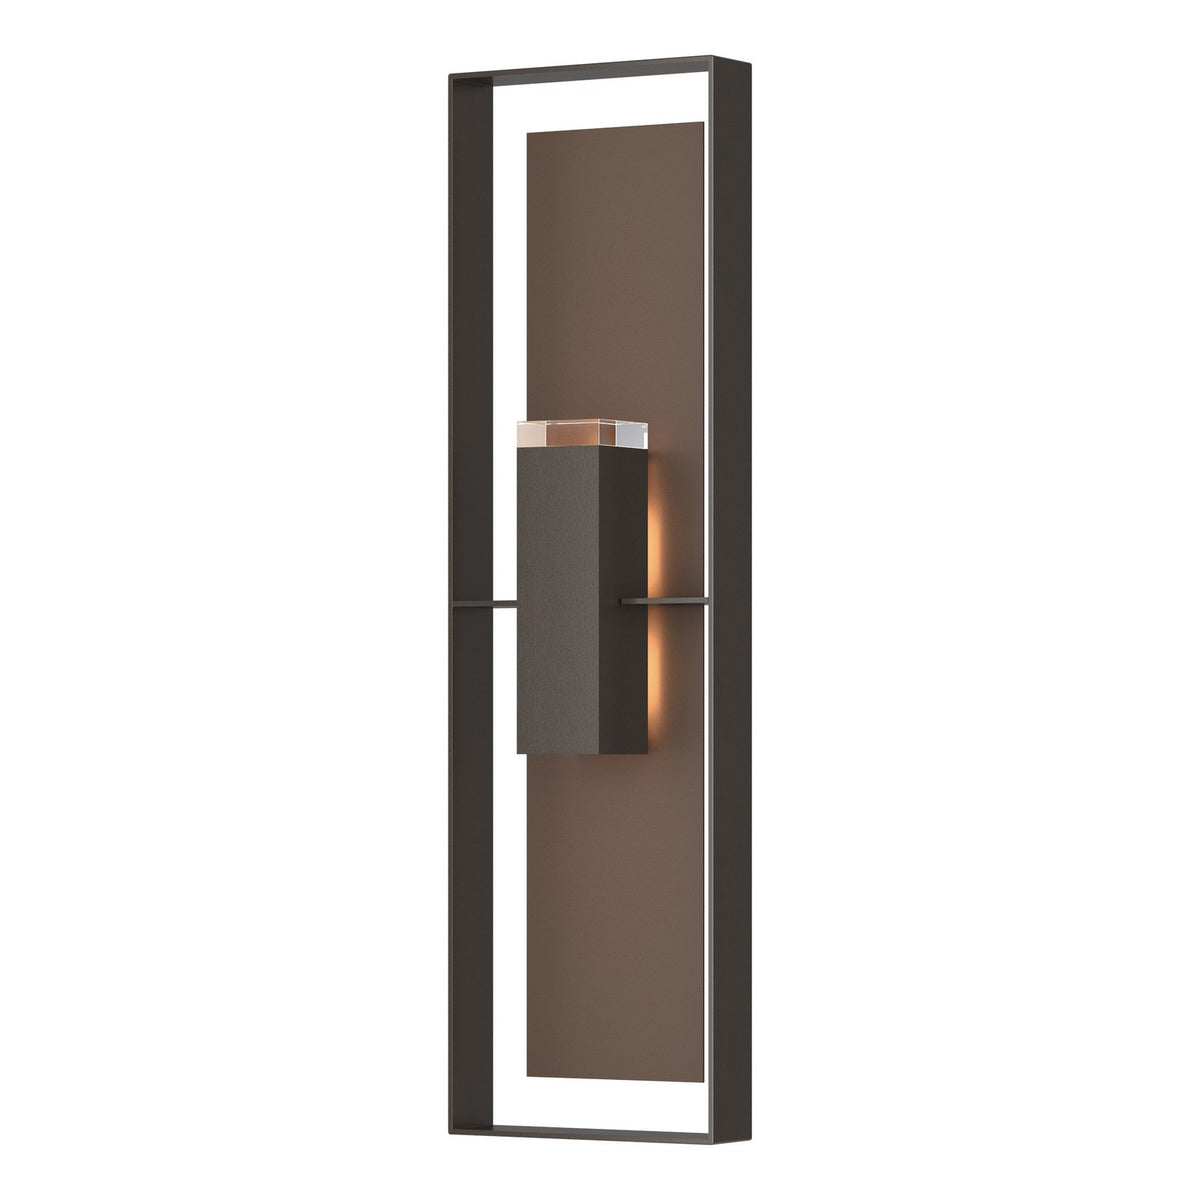 Hubbardton Forge - 302608-SKT-14-75-ZM0736 - Two Light Outdoor Wall Sconce - Shadow Box - Coastal Oil Rubbed Bronze